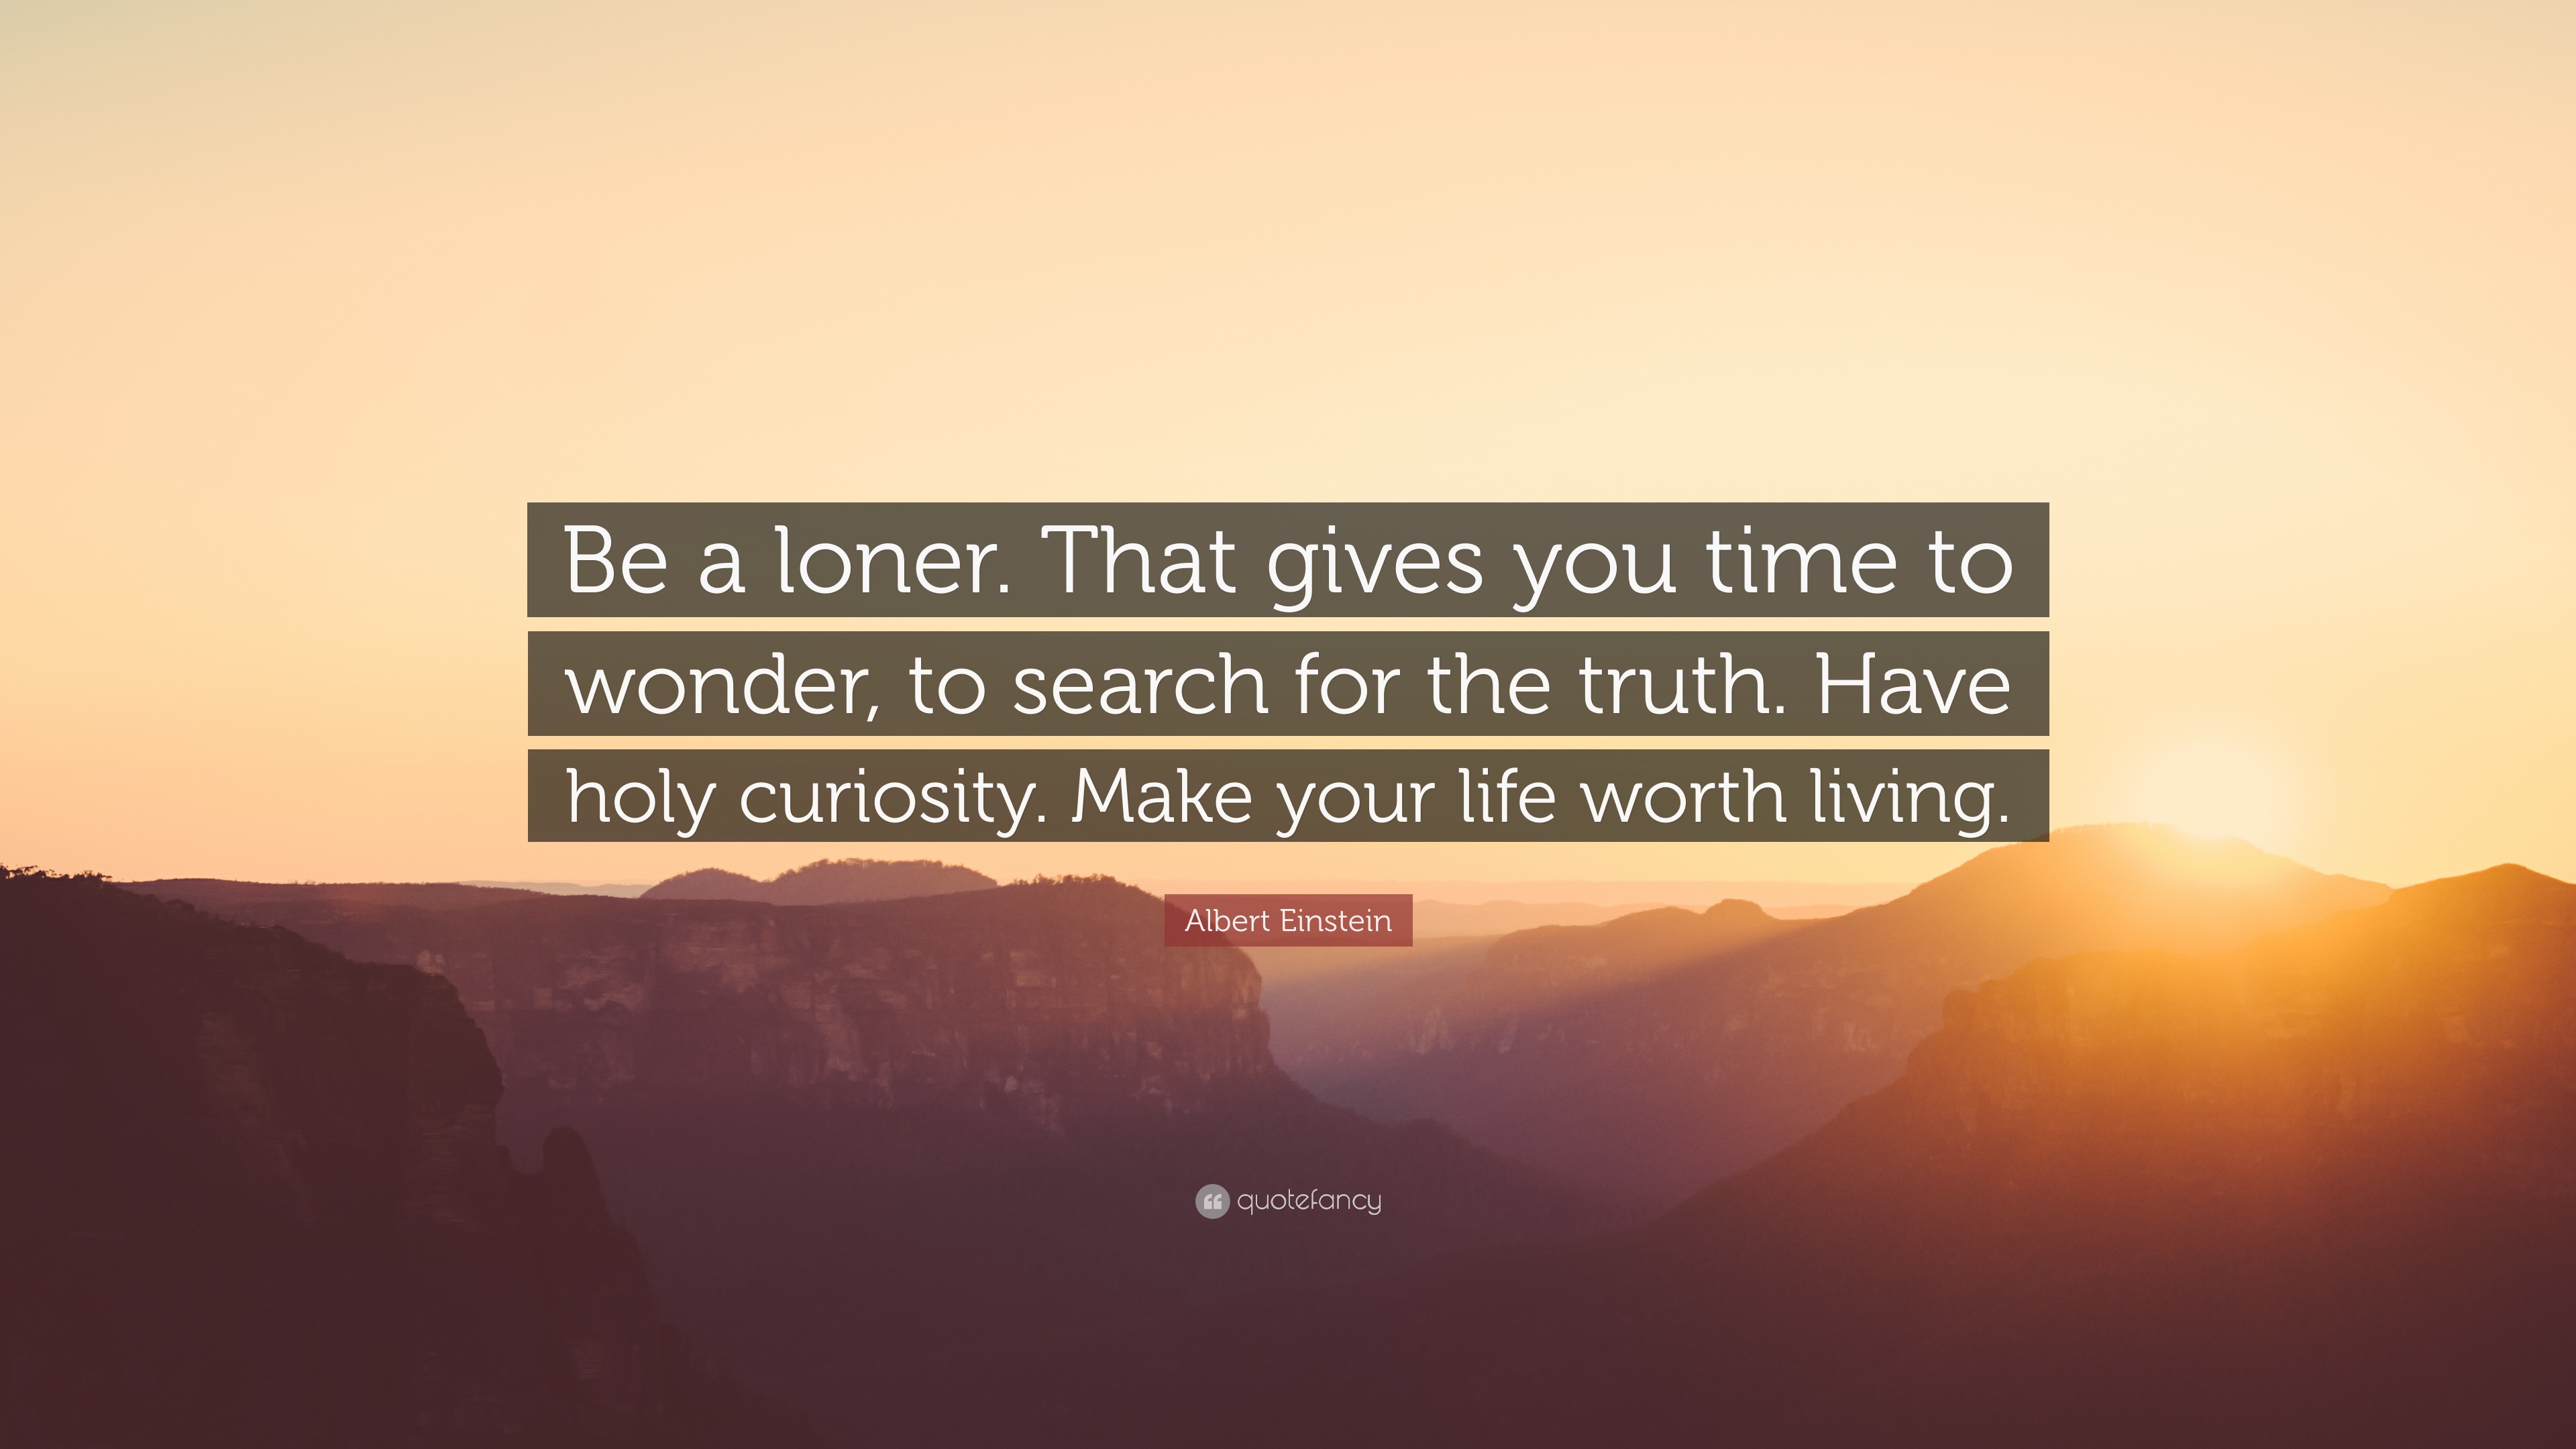 Albert Einstein Quote “Be a loner That gives you time to wonder